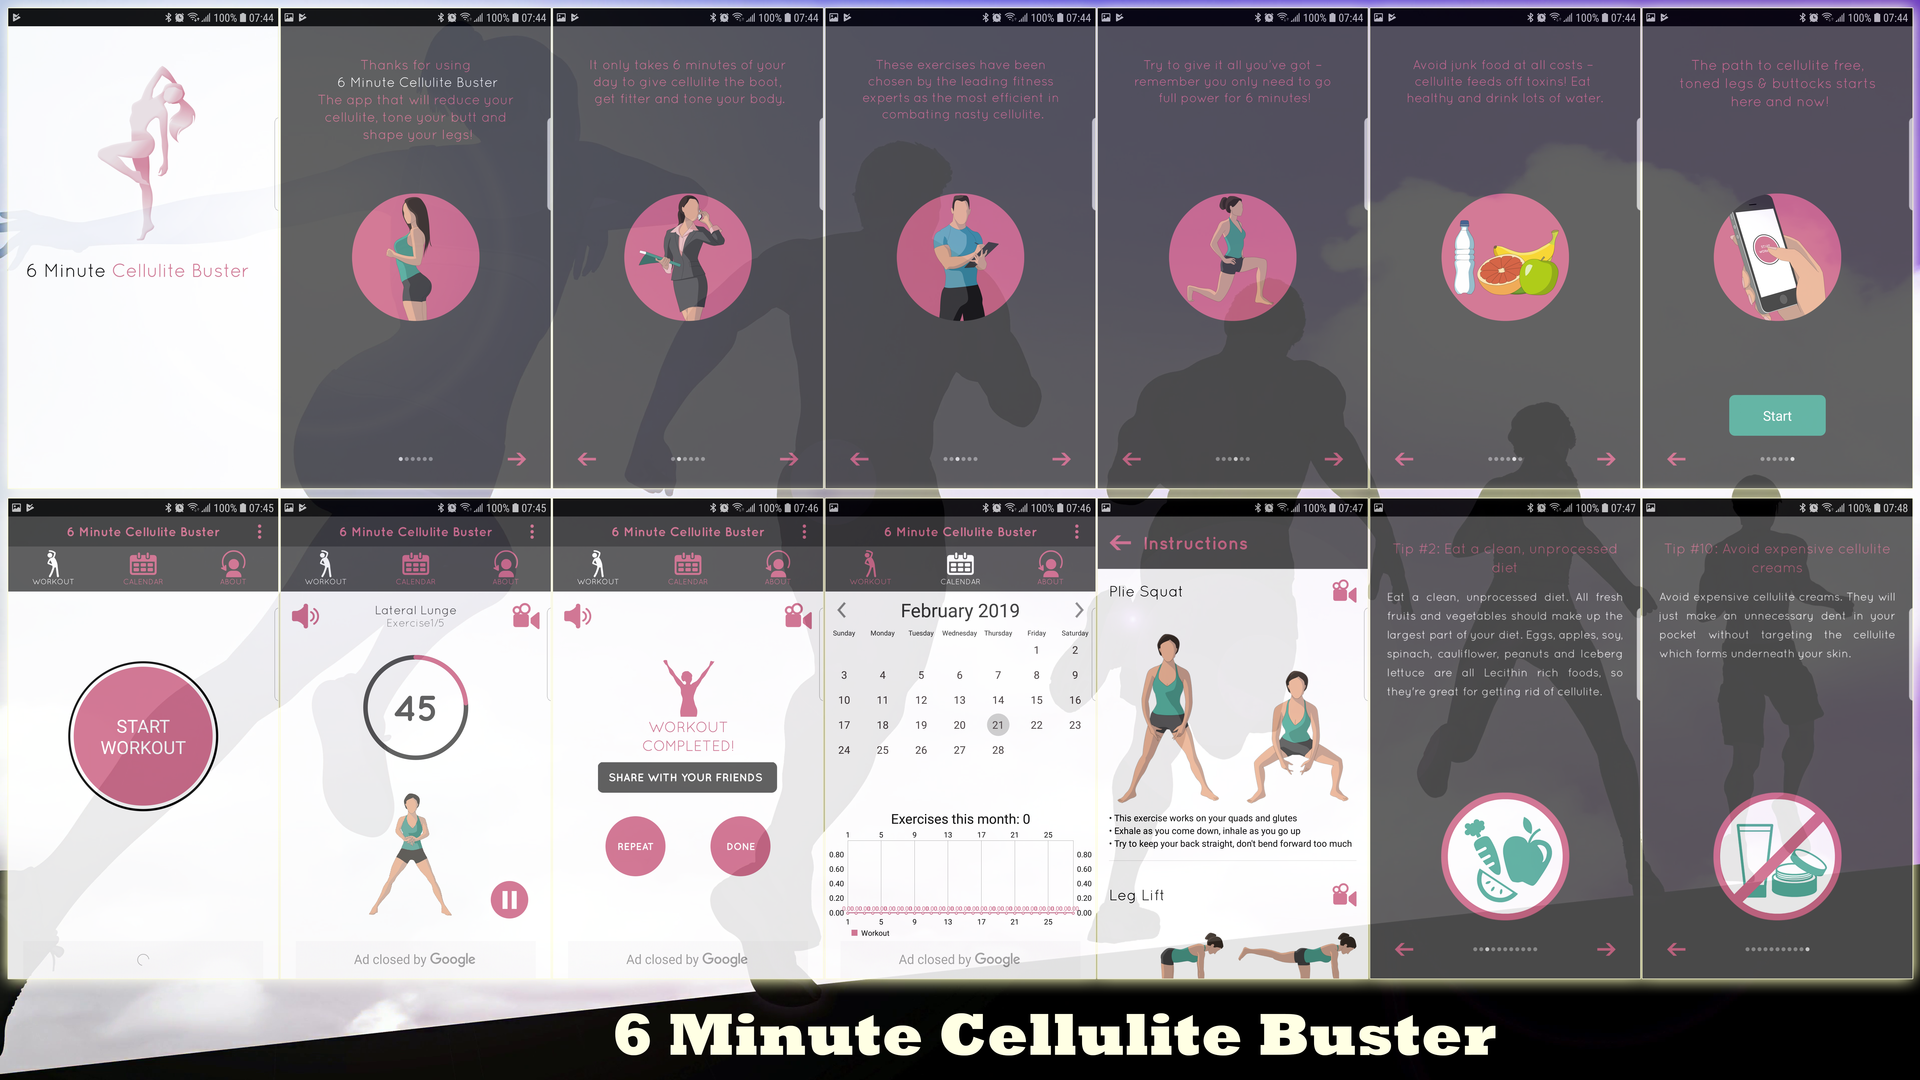 6 Minute Cellulite Buster